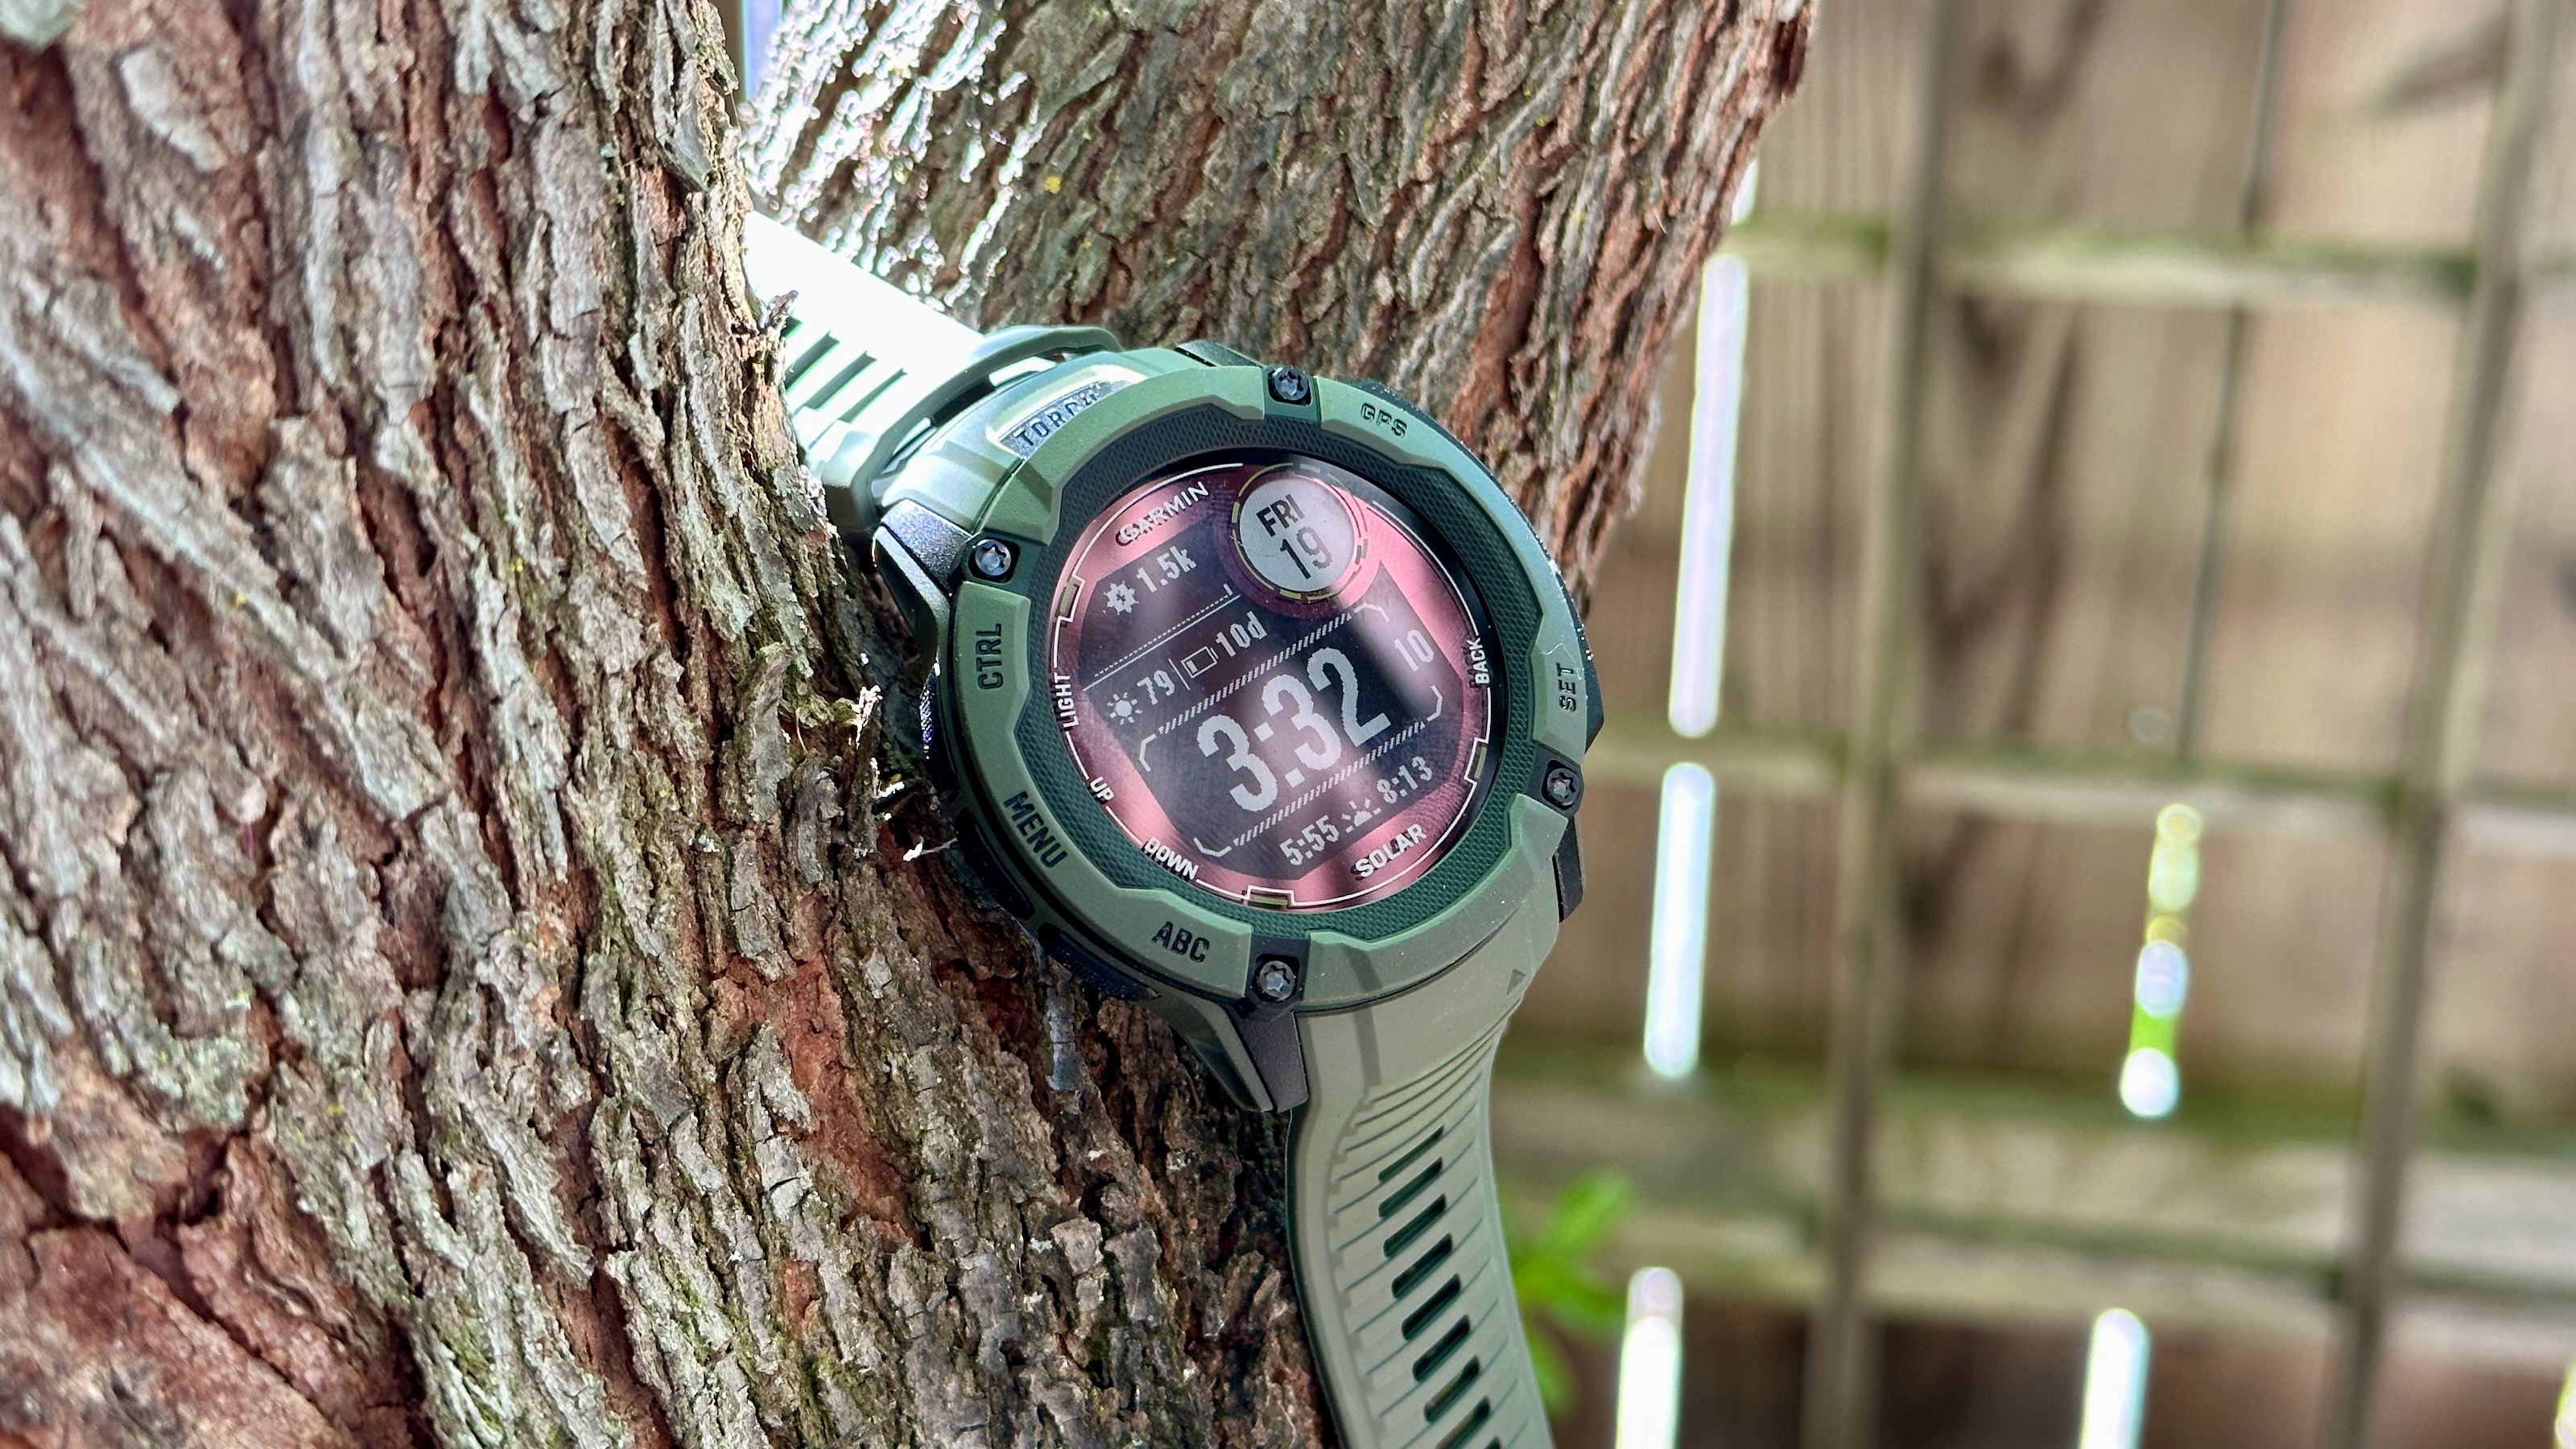 The Garmin Instinct 2X Solar hanging from a tree, showing the main watch face